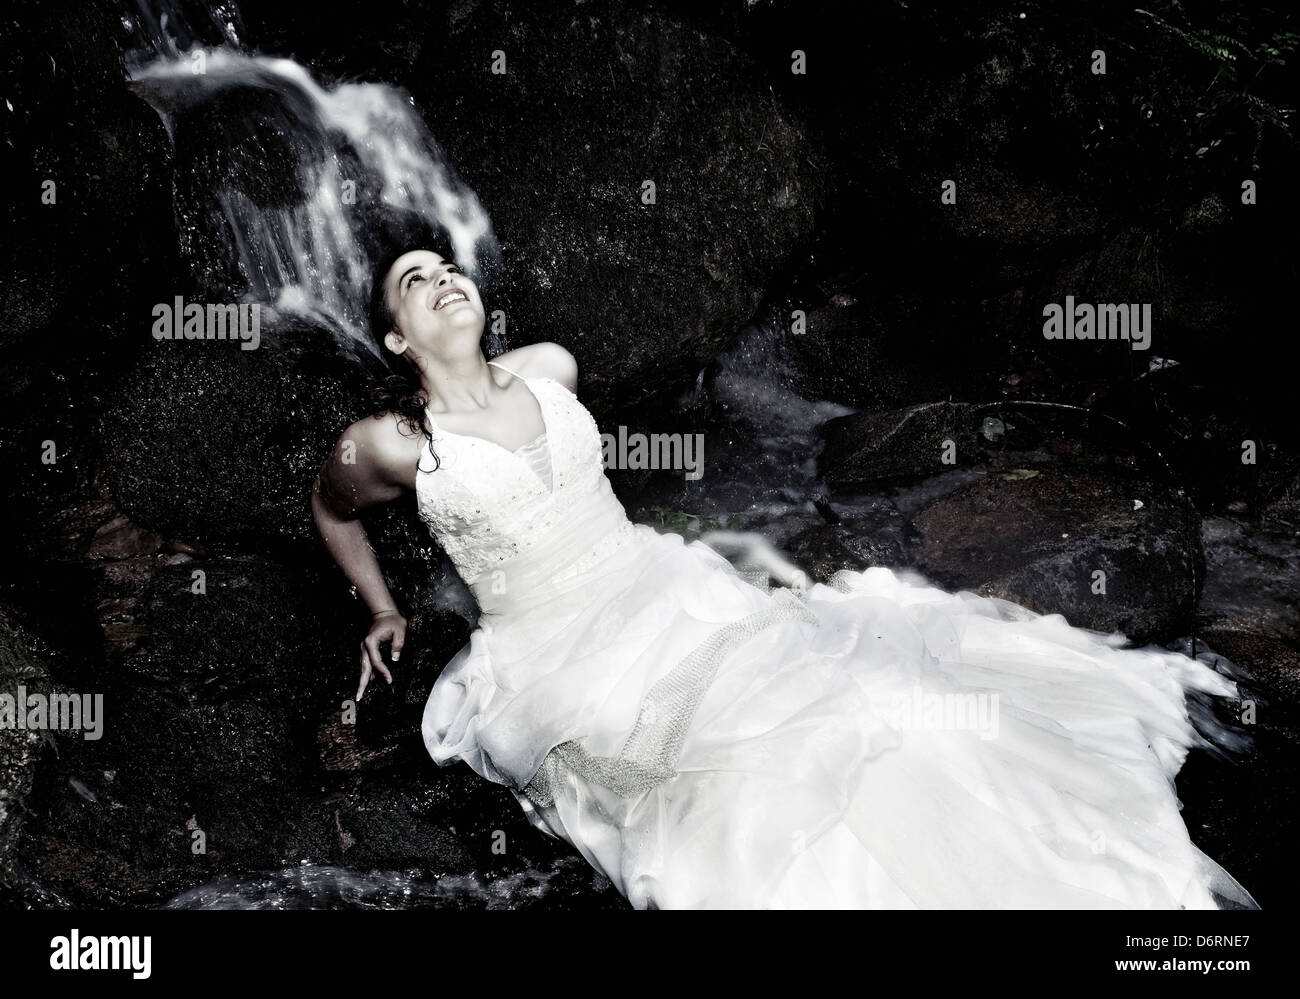 Bride and groom dating close to a waterfall Stock Photo